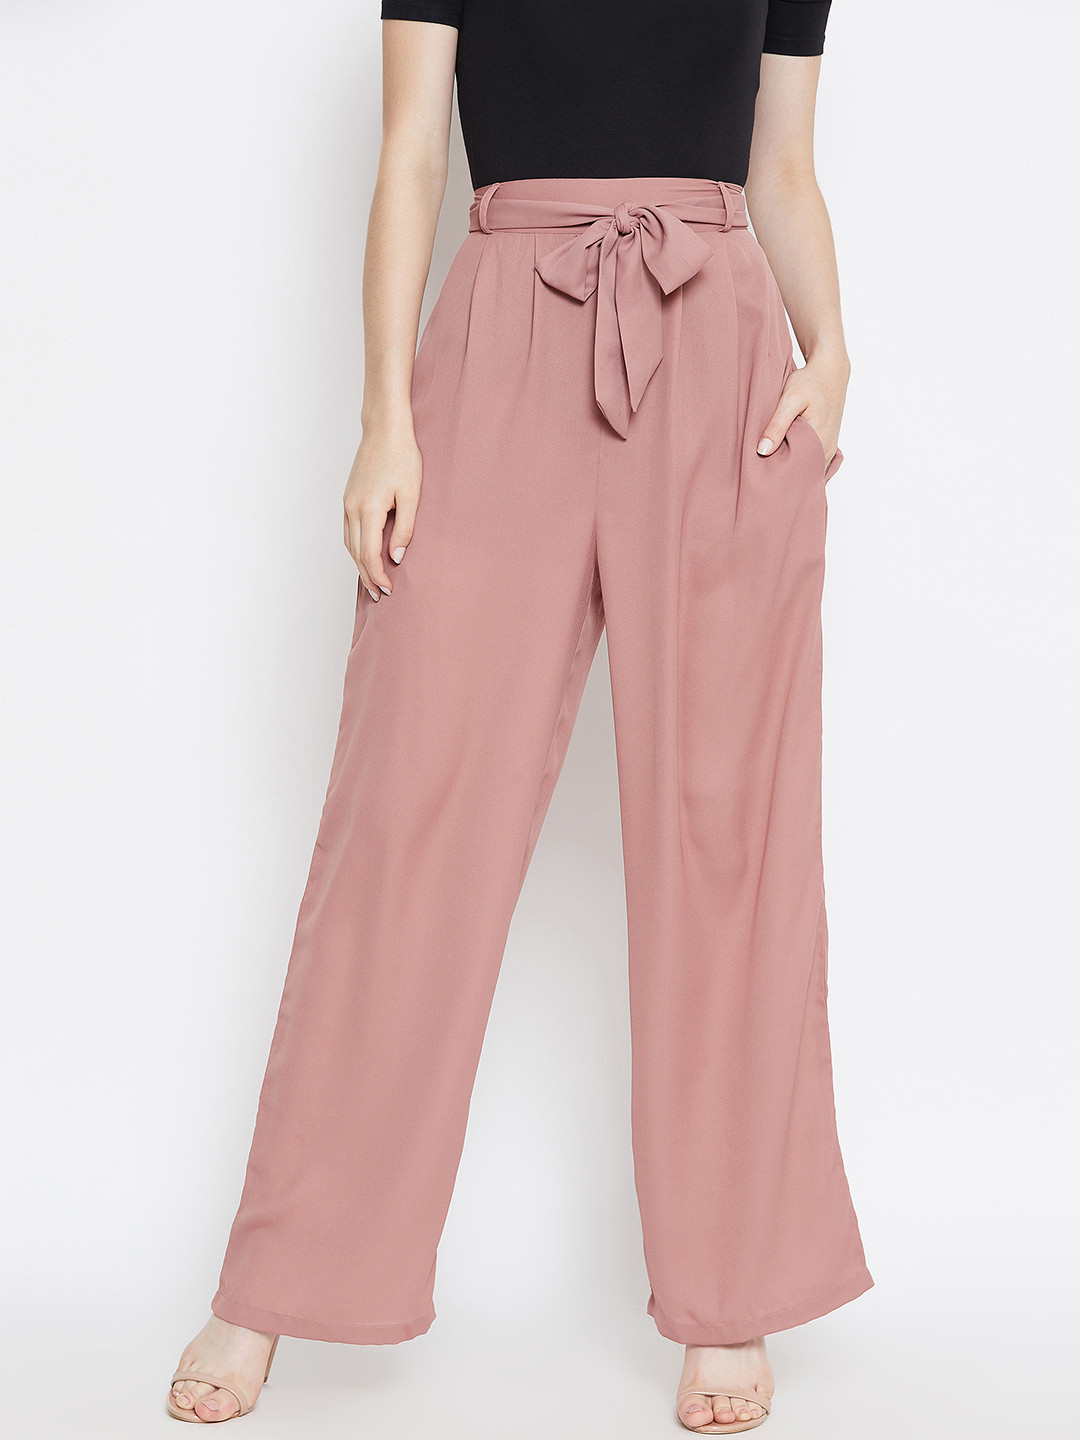 Buy Beige Trousers & Pants for Women by MAX Online | Ajio.com